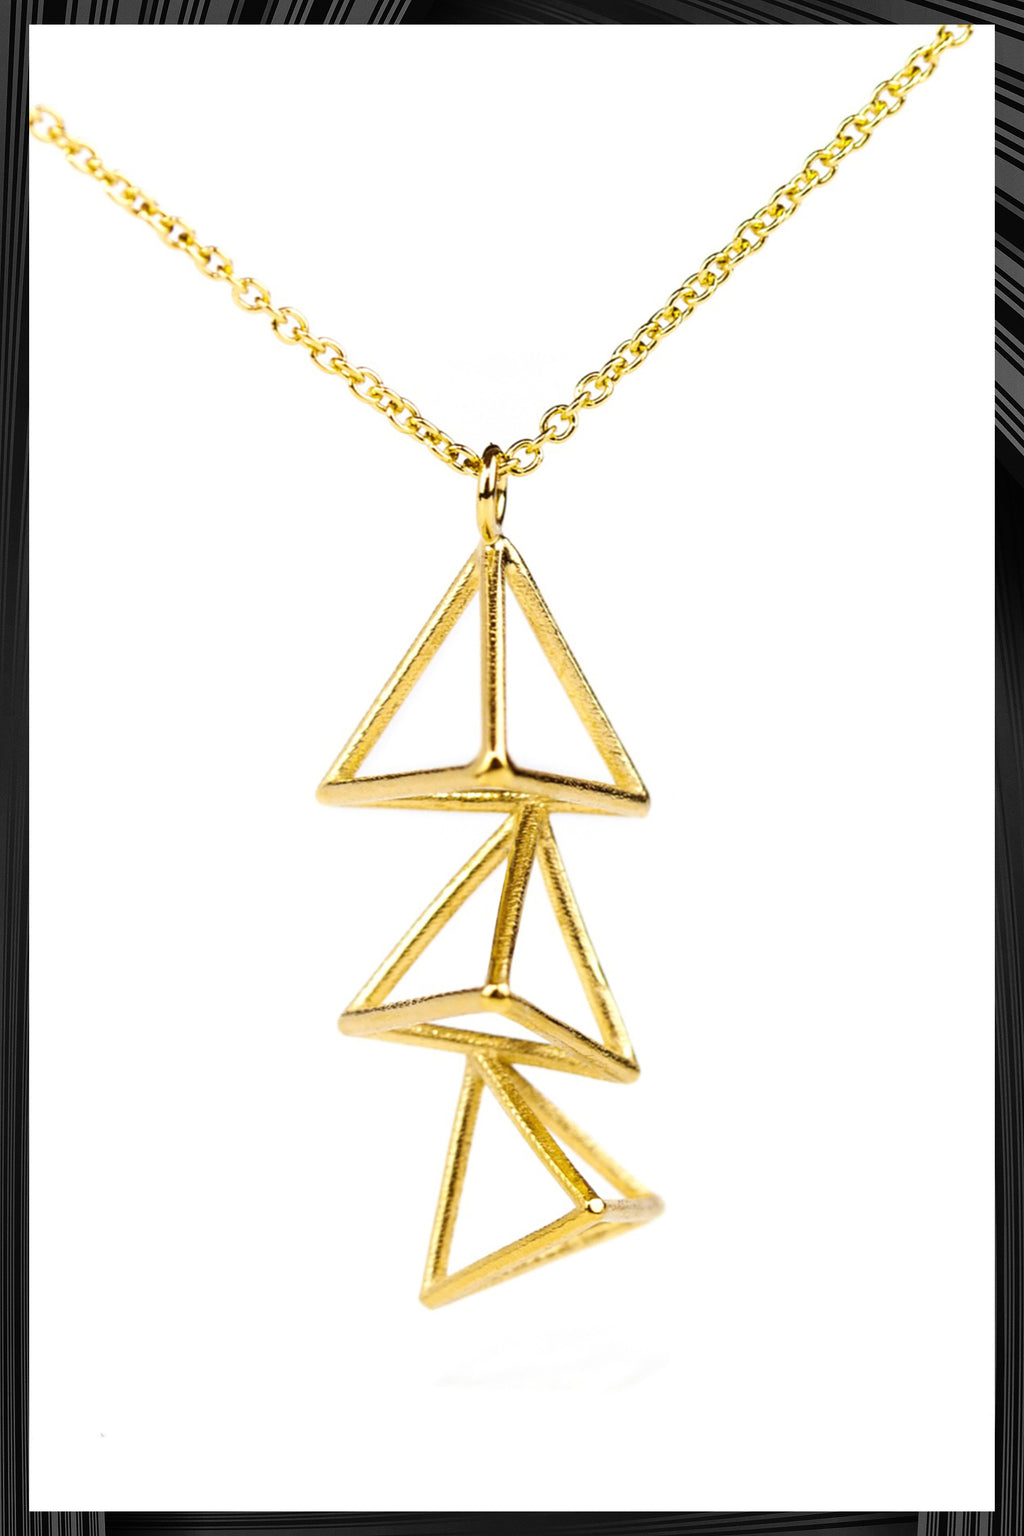 Gold Triple Triangle Necklace | Free Shipping - Quick Delivery